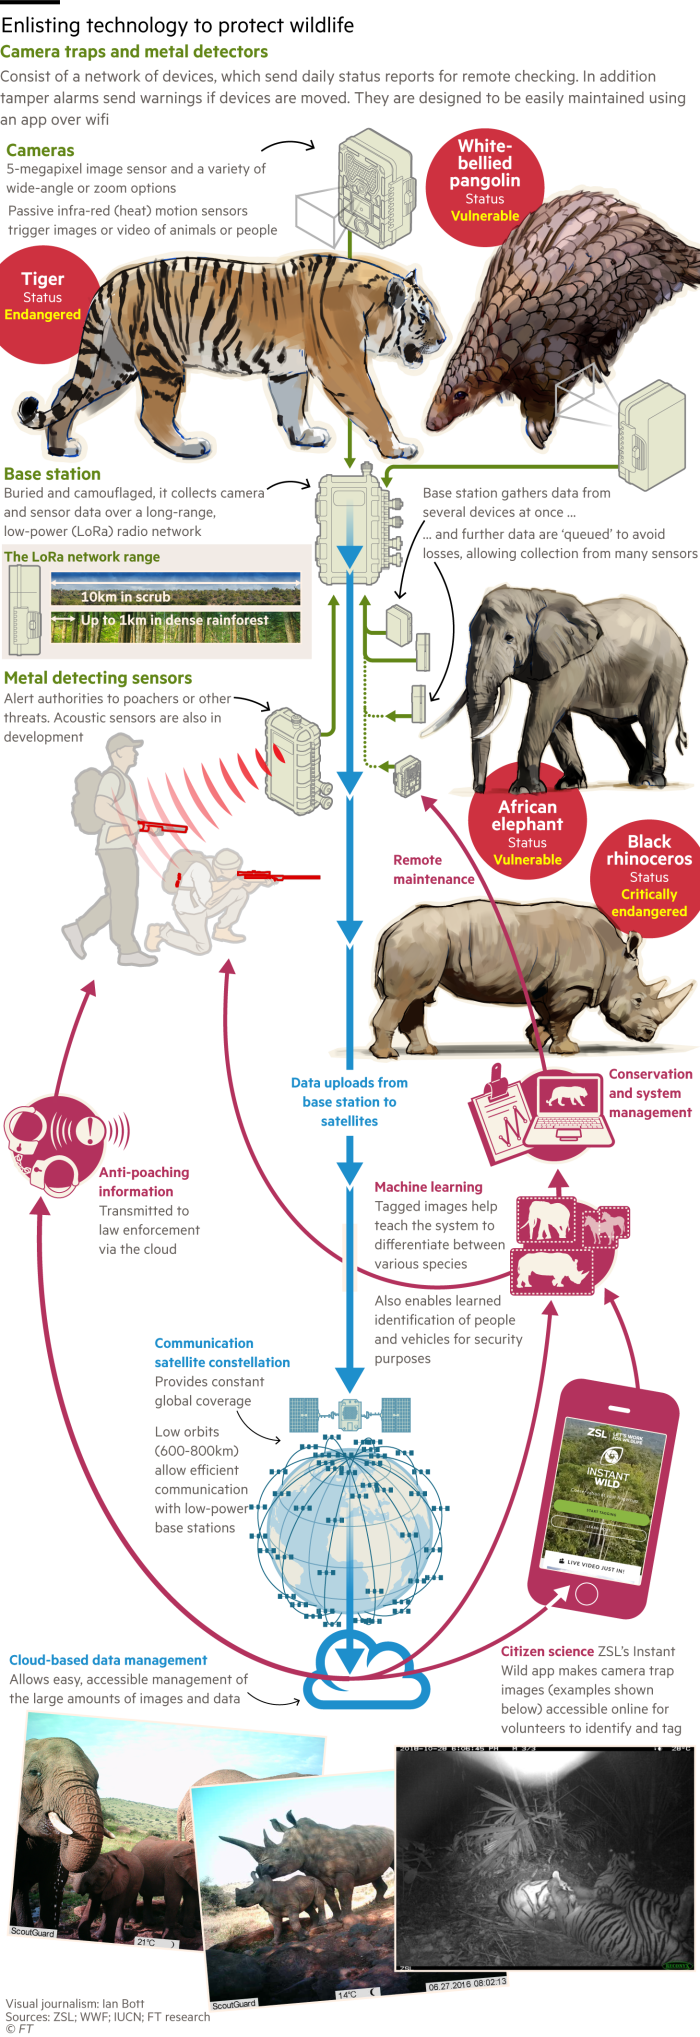 An information graphic explaining how technology is being used to tackle wildlife poaching and help conservation